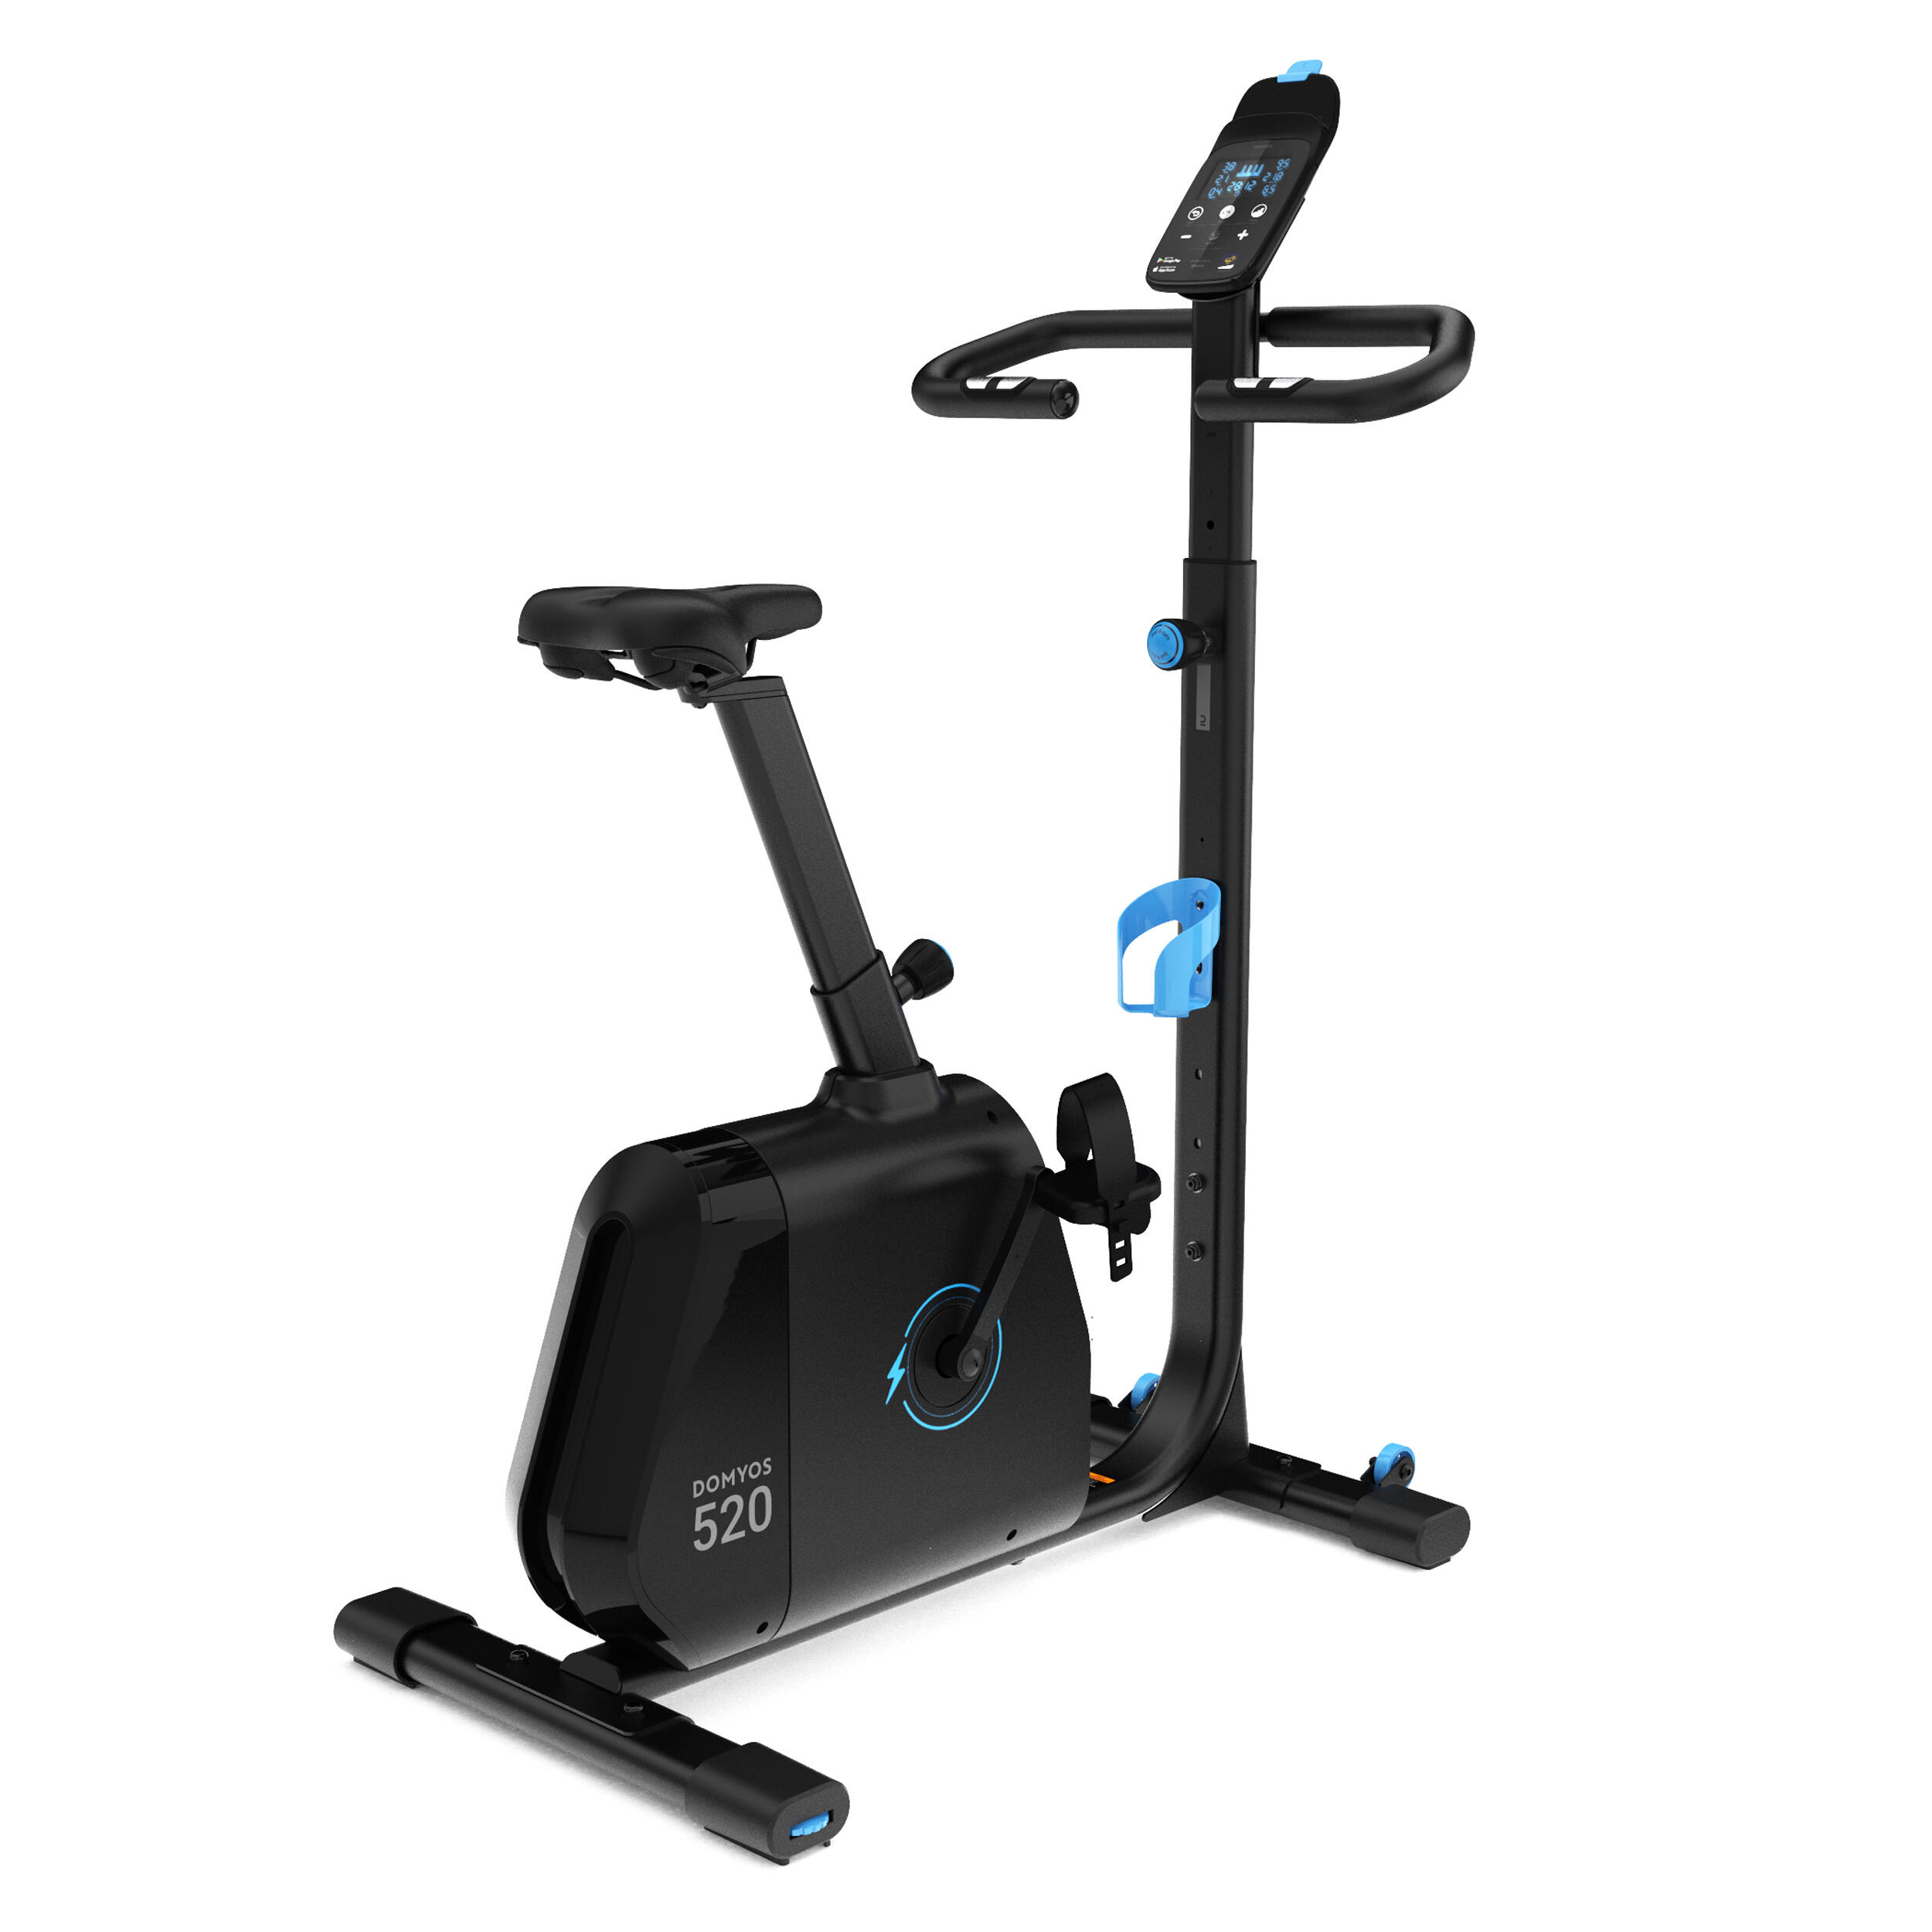 DOMYOS Self-Powered Exercise Bike 520 Connected to Coaching Apps